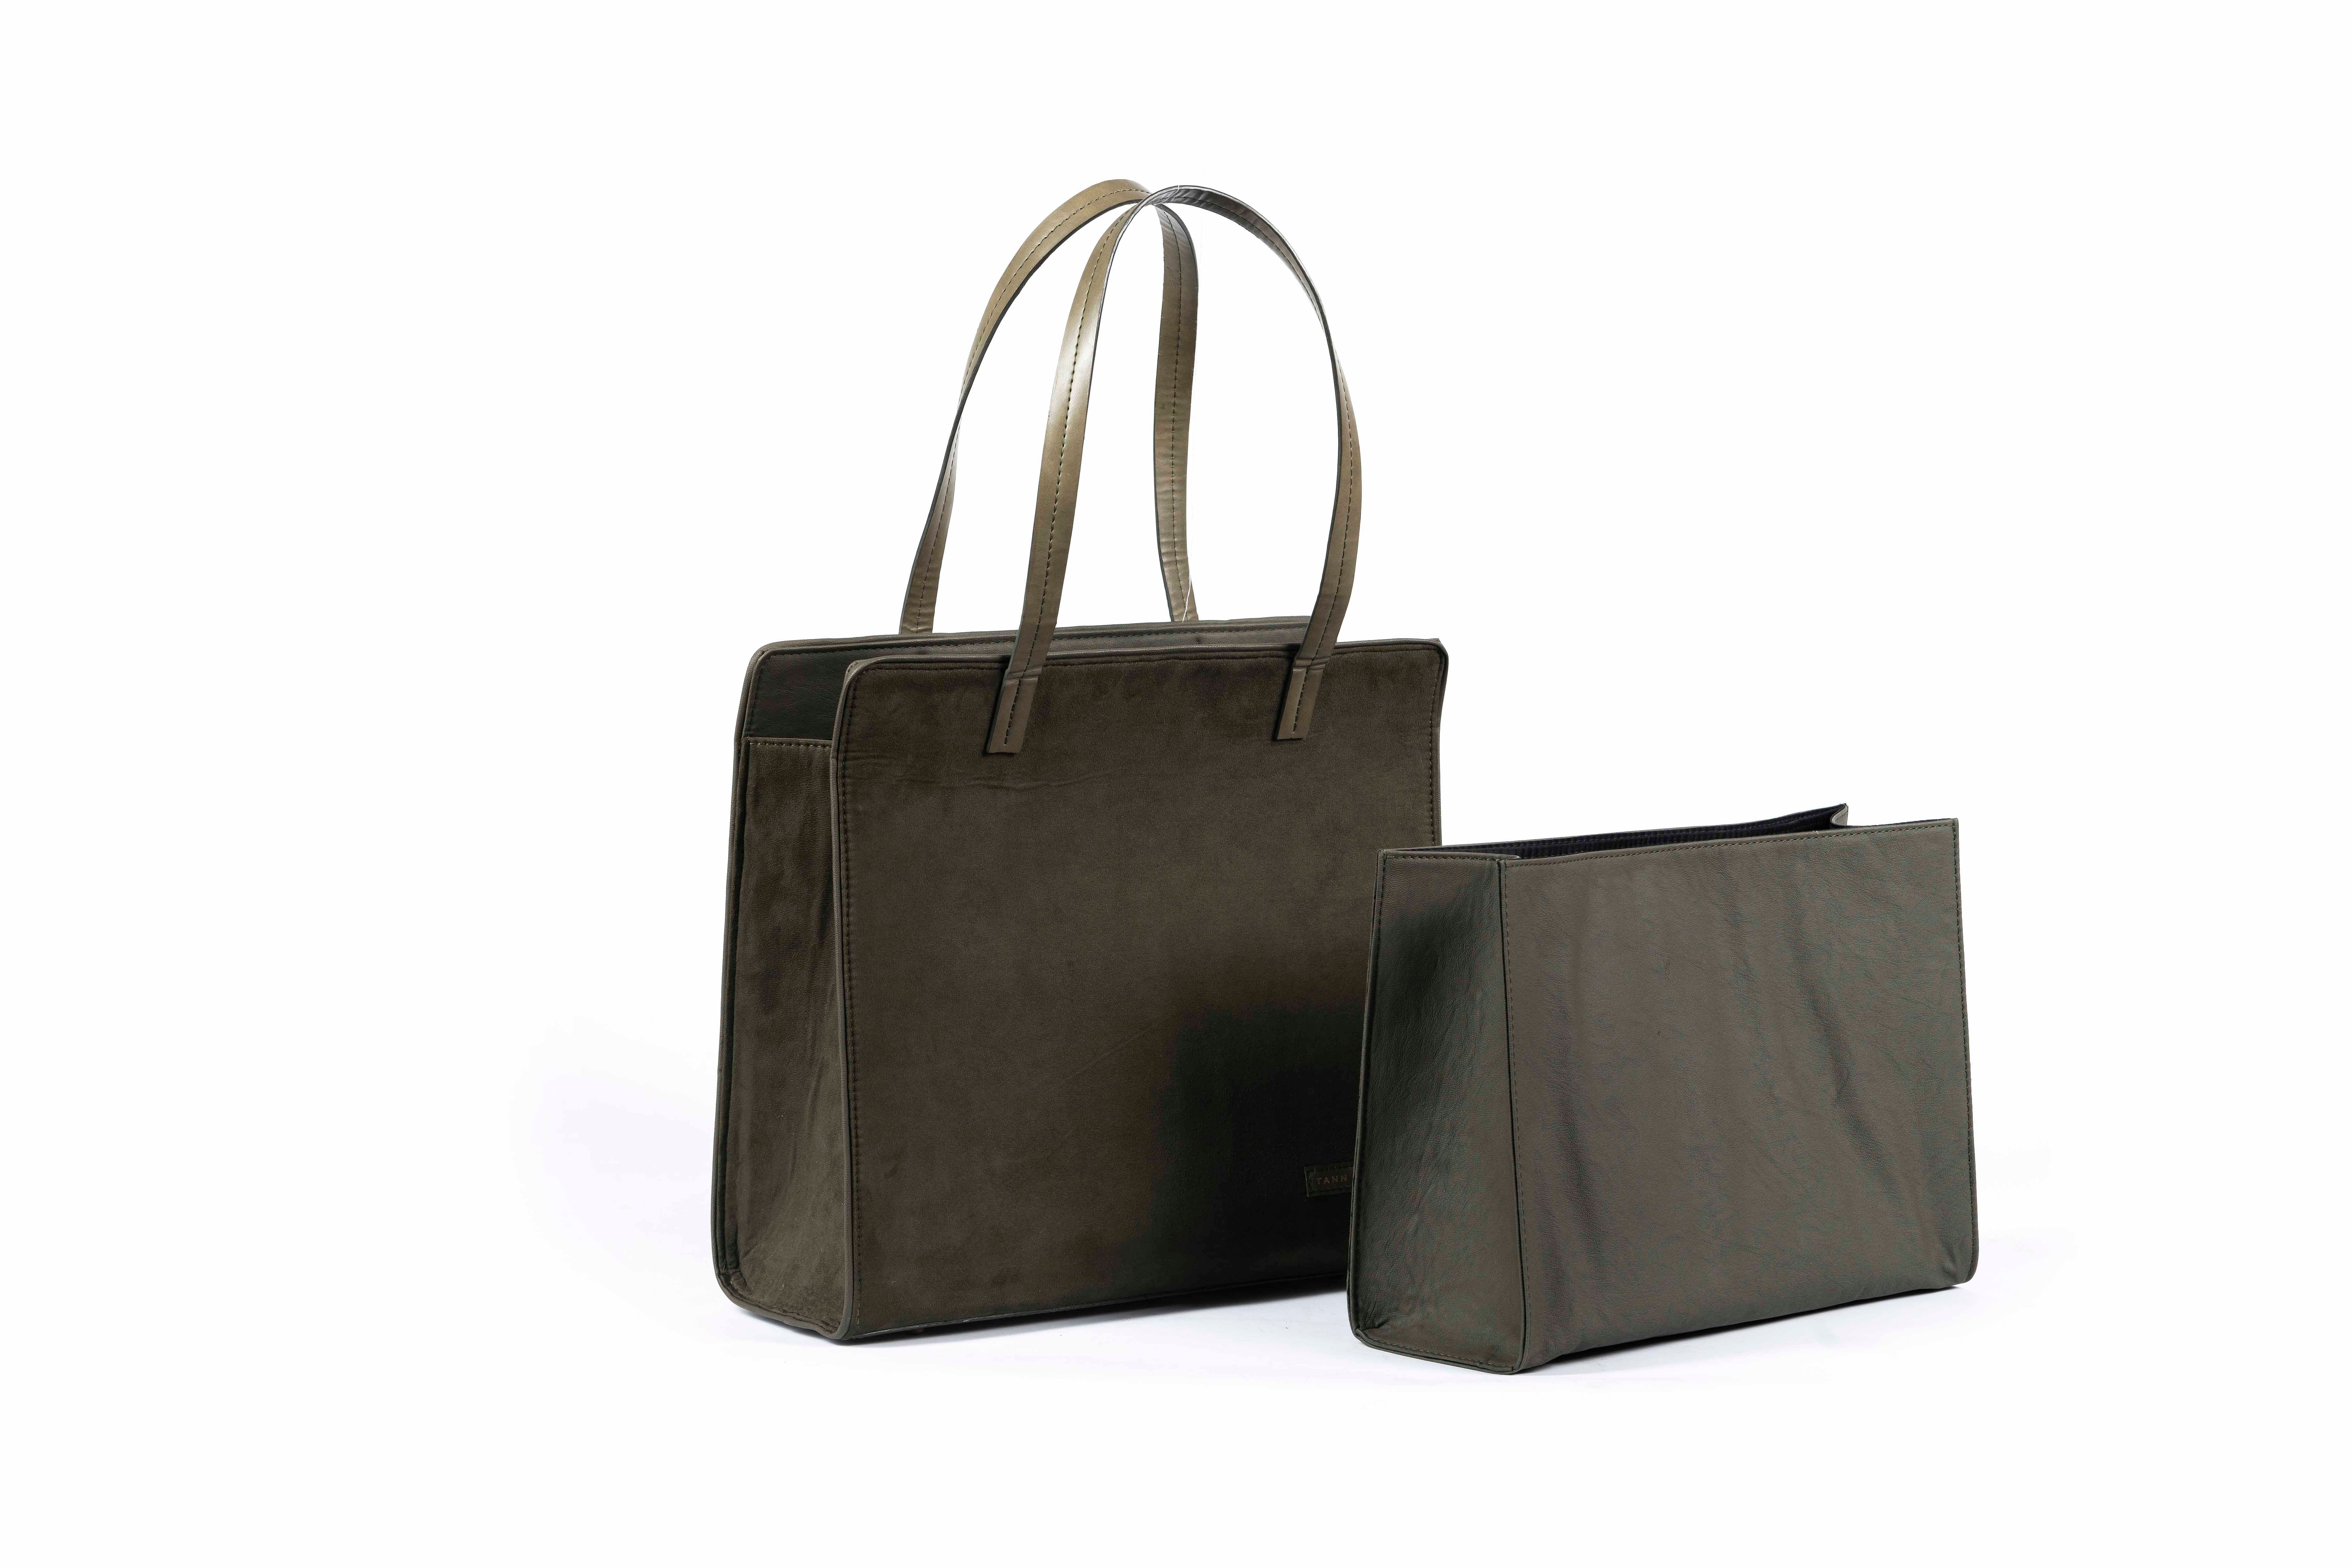 The Carry-All Work Tote & Organiser